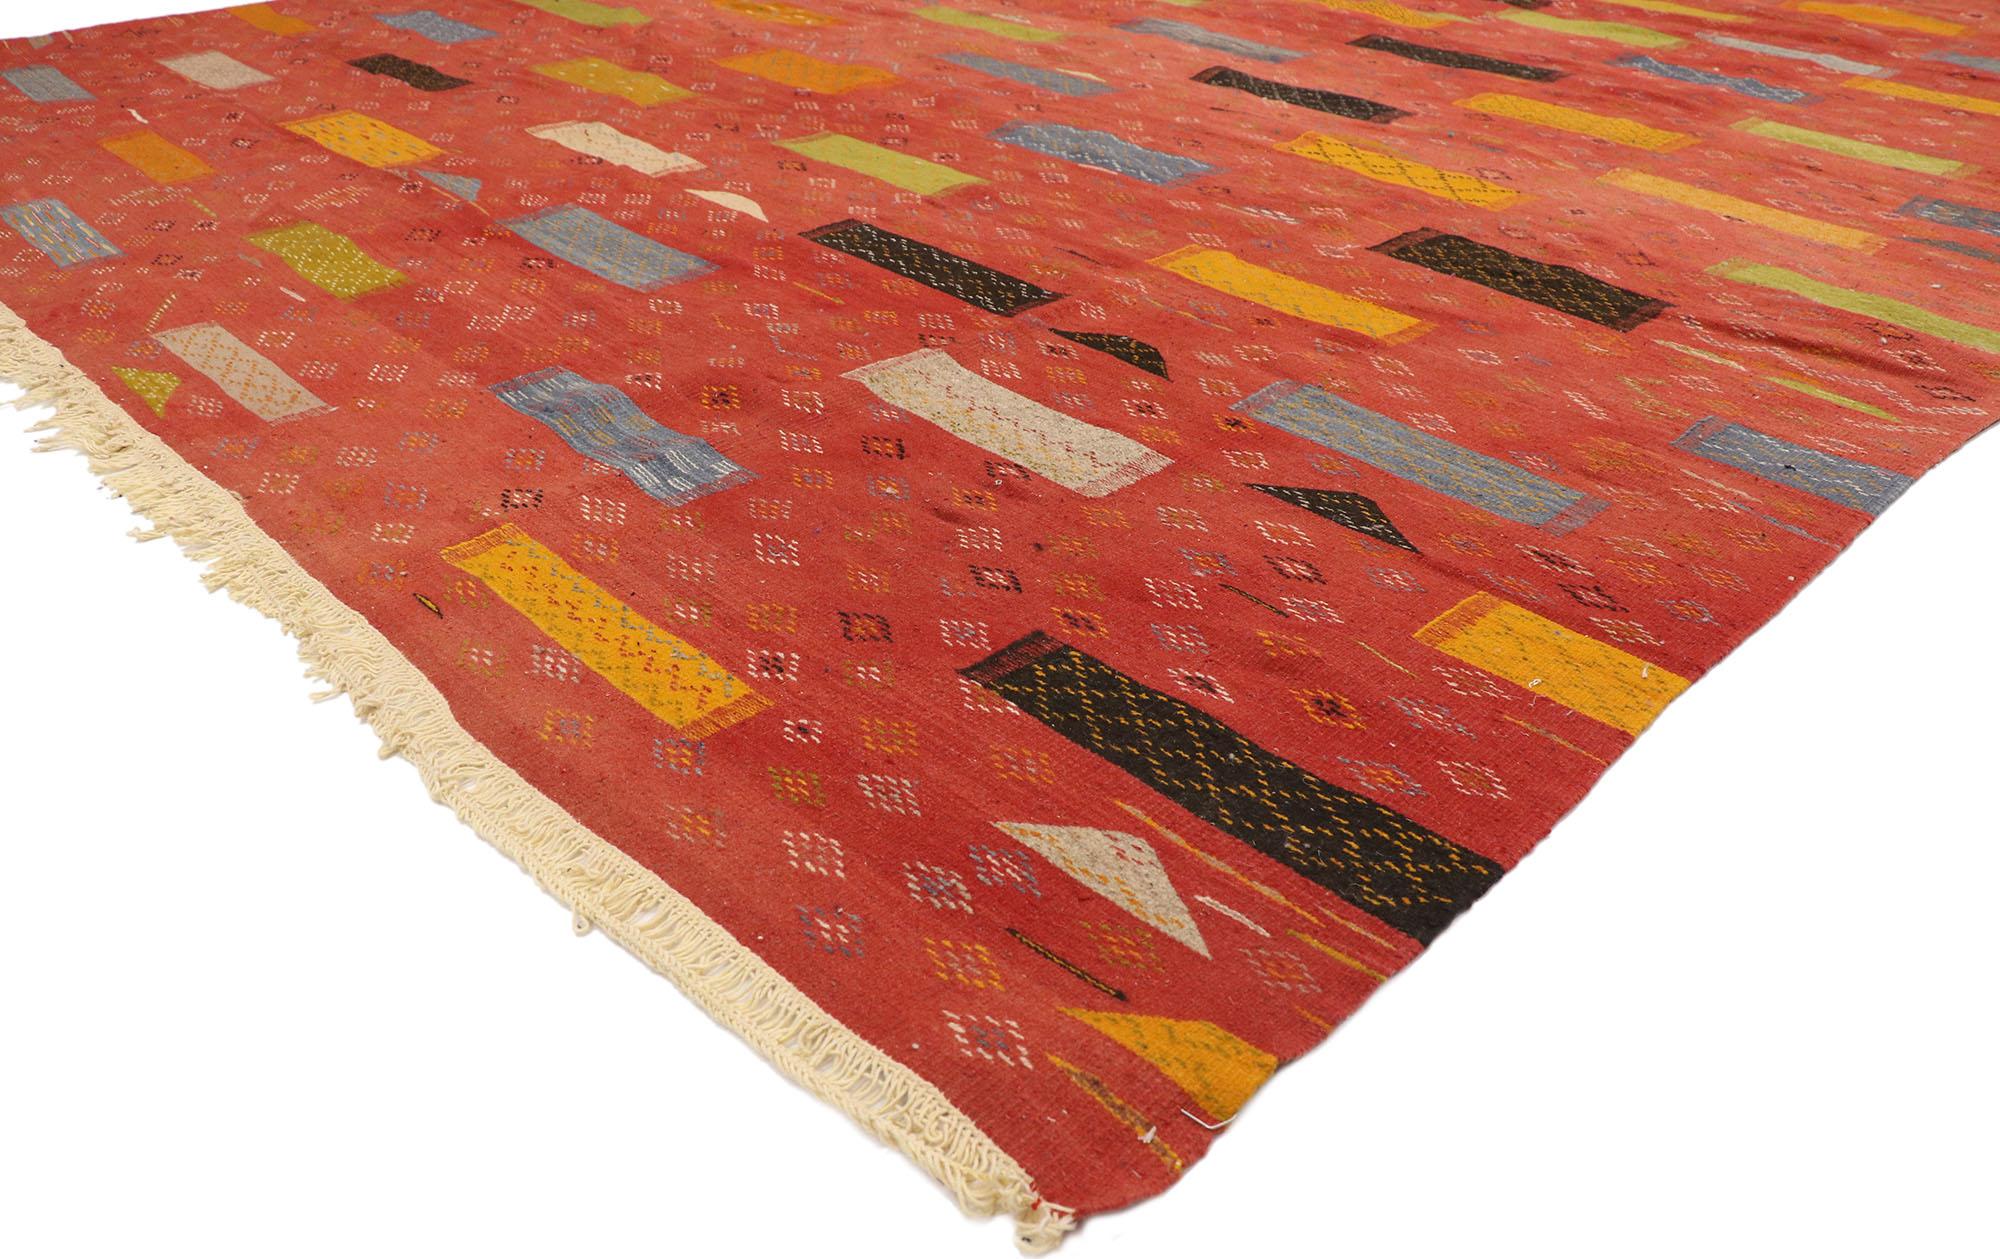 20910 Authentic Taznakht Moroccan Kilim Rug, 09'03 x 12'10. A Taznakht Moroccan kilim rug, traditionally crafted by the Berber people in the Taznakht region of Morocco, is a flat-woven rug distinguished by its vibrant colors, geometric patterns, and